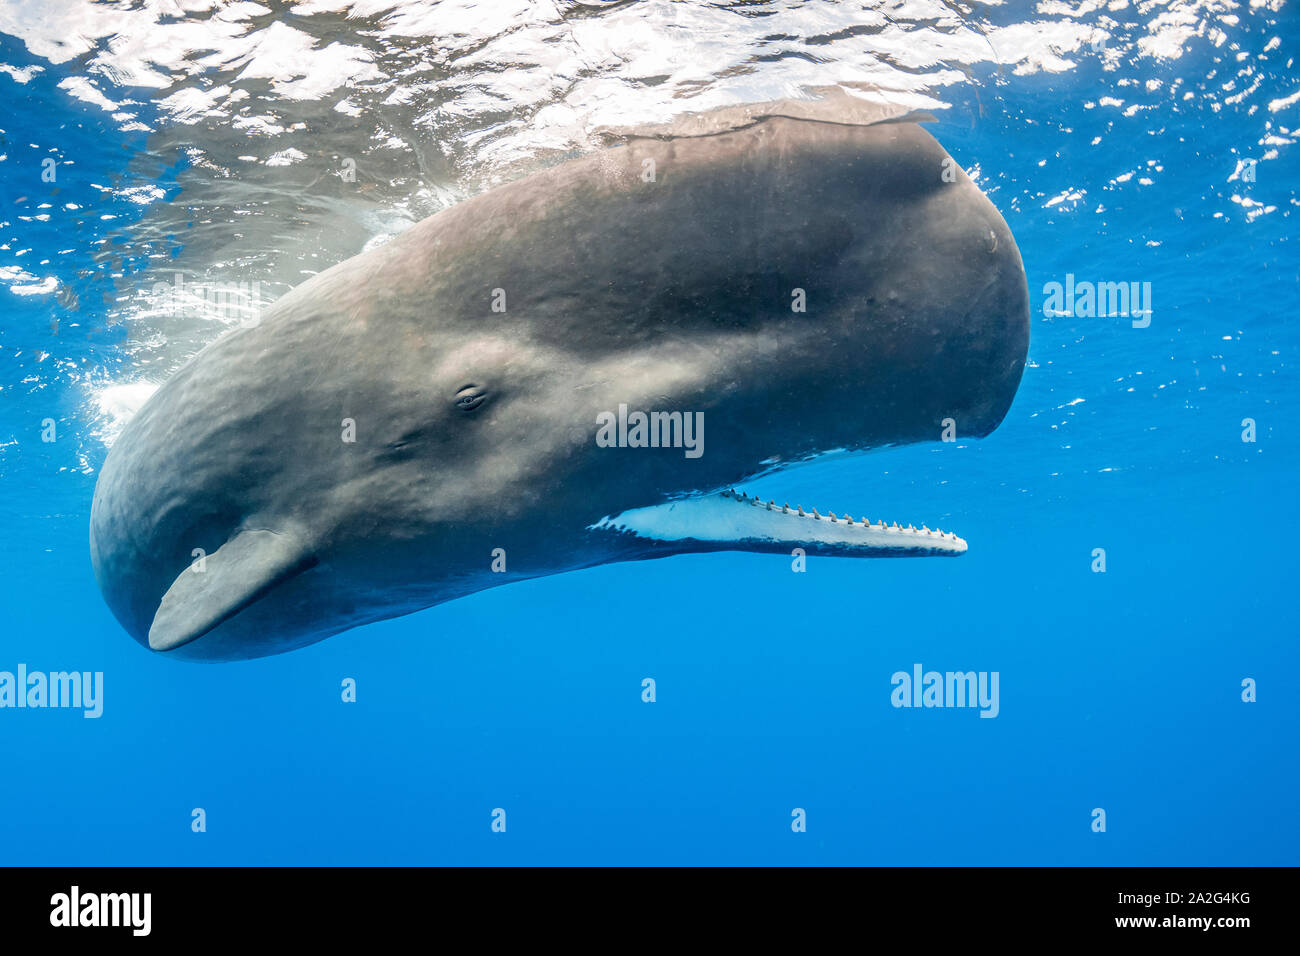 Sperm whale, Physeter macrocephalus, with open mouth, showing the teeth The  sperm whale is the largest of the toothed whales Sperm whales are known to  Stock Photo - Alamy